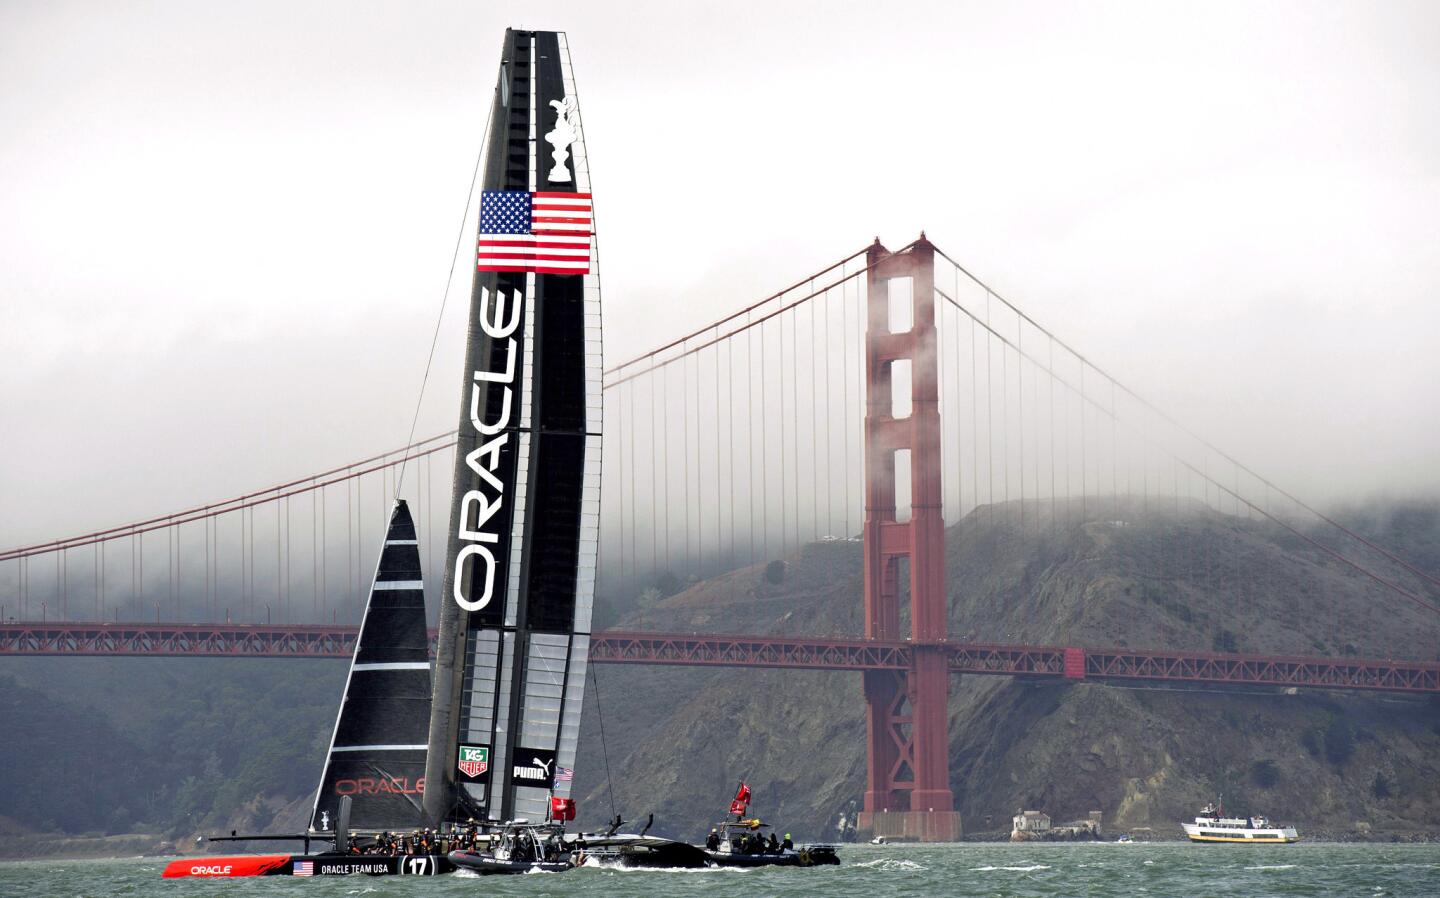 Oracle Team USA sails near the Golden Gate Bridge. The mast of the AC72 boat is 131 feet tall.